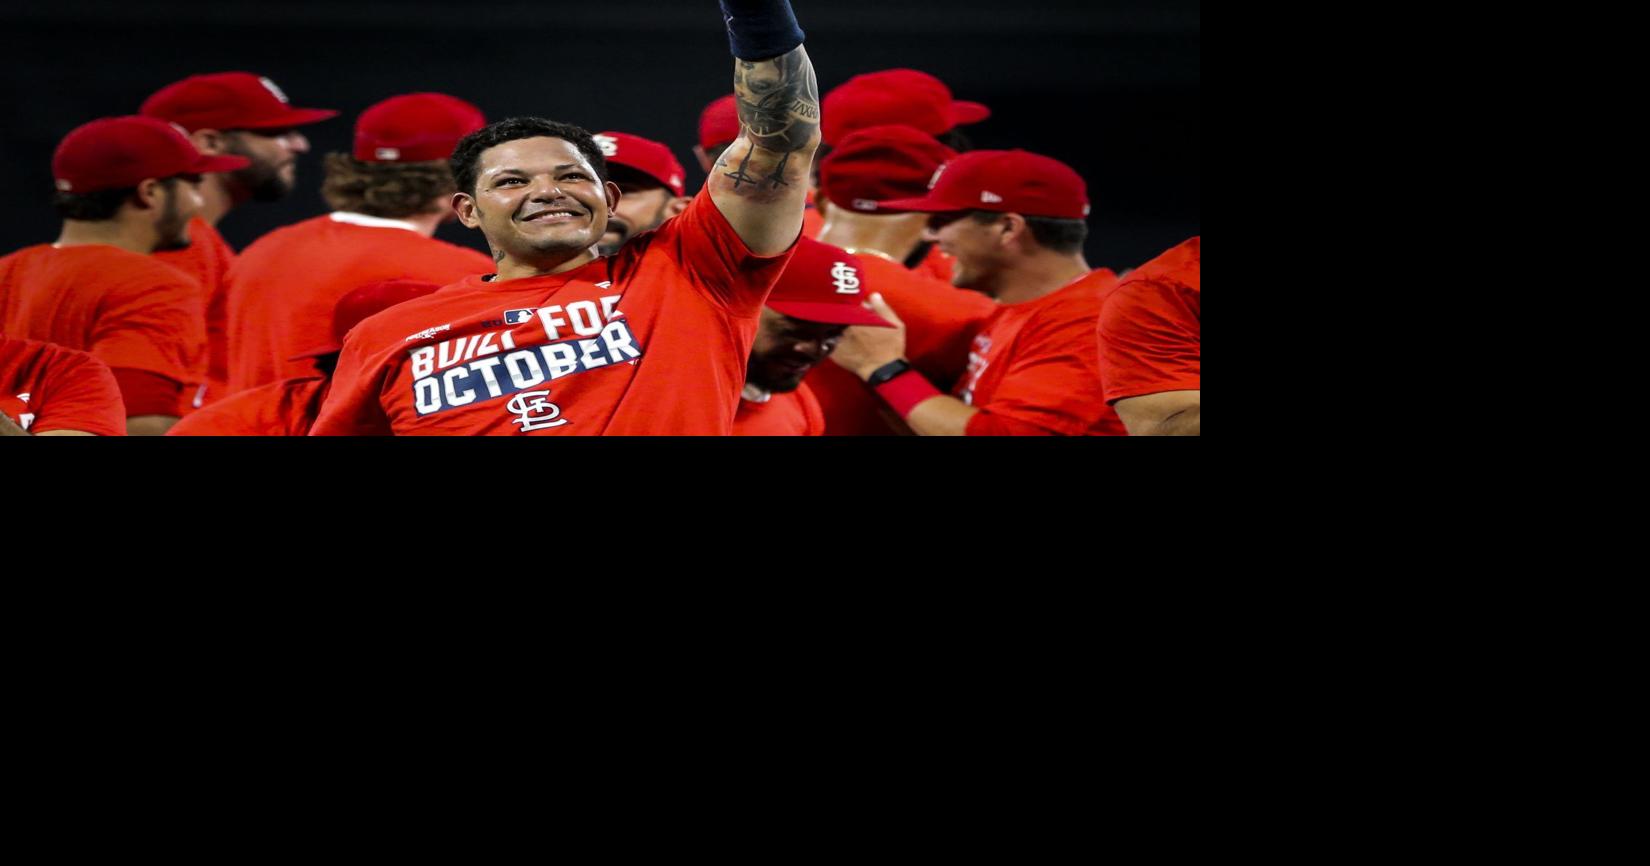 Hochman: Yadier Molina has more than lived up to 'El Marciano' nickname